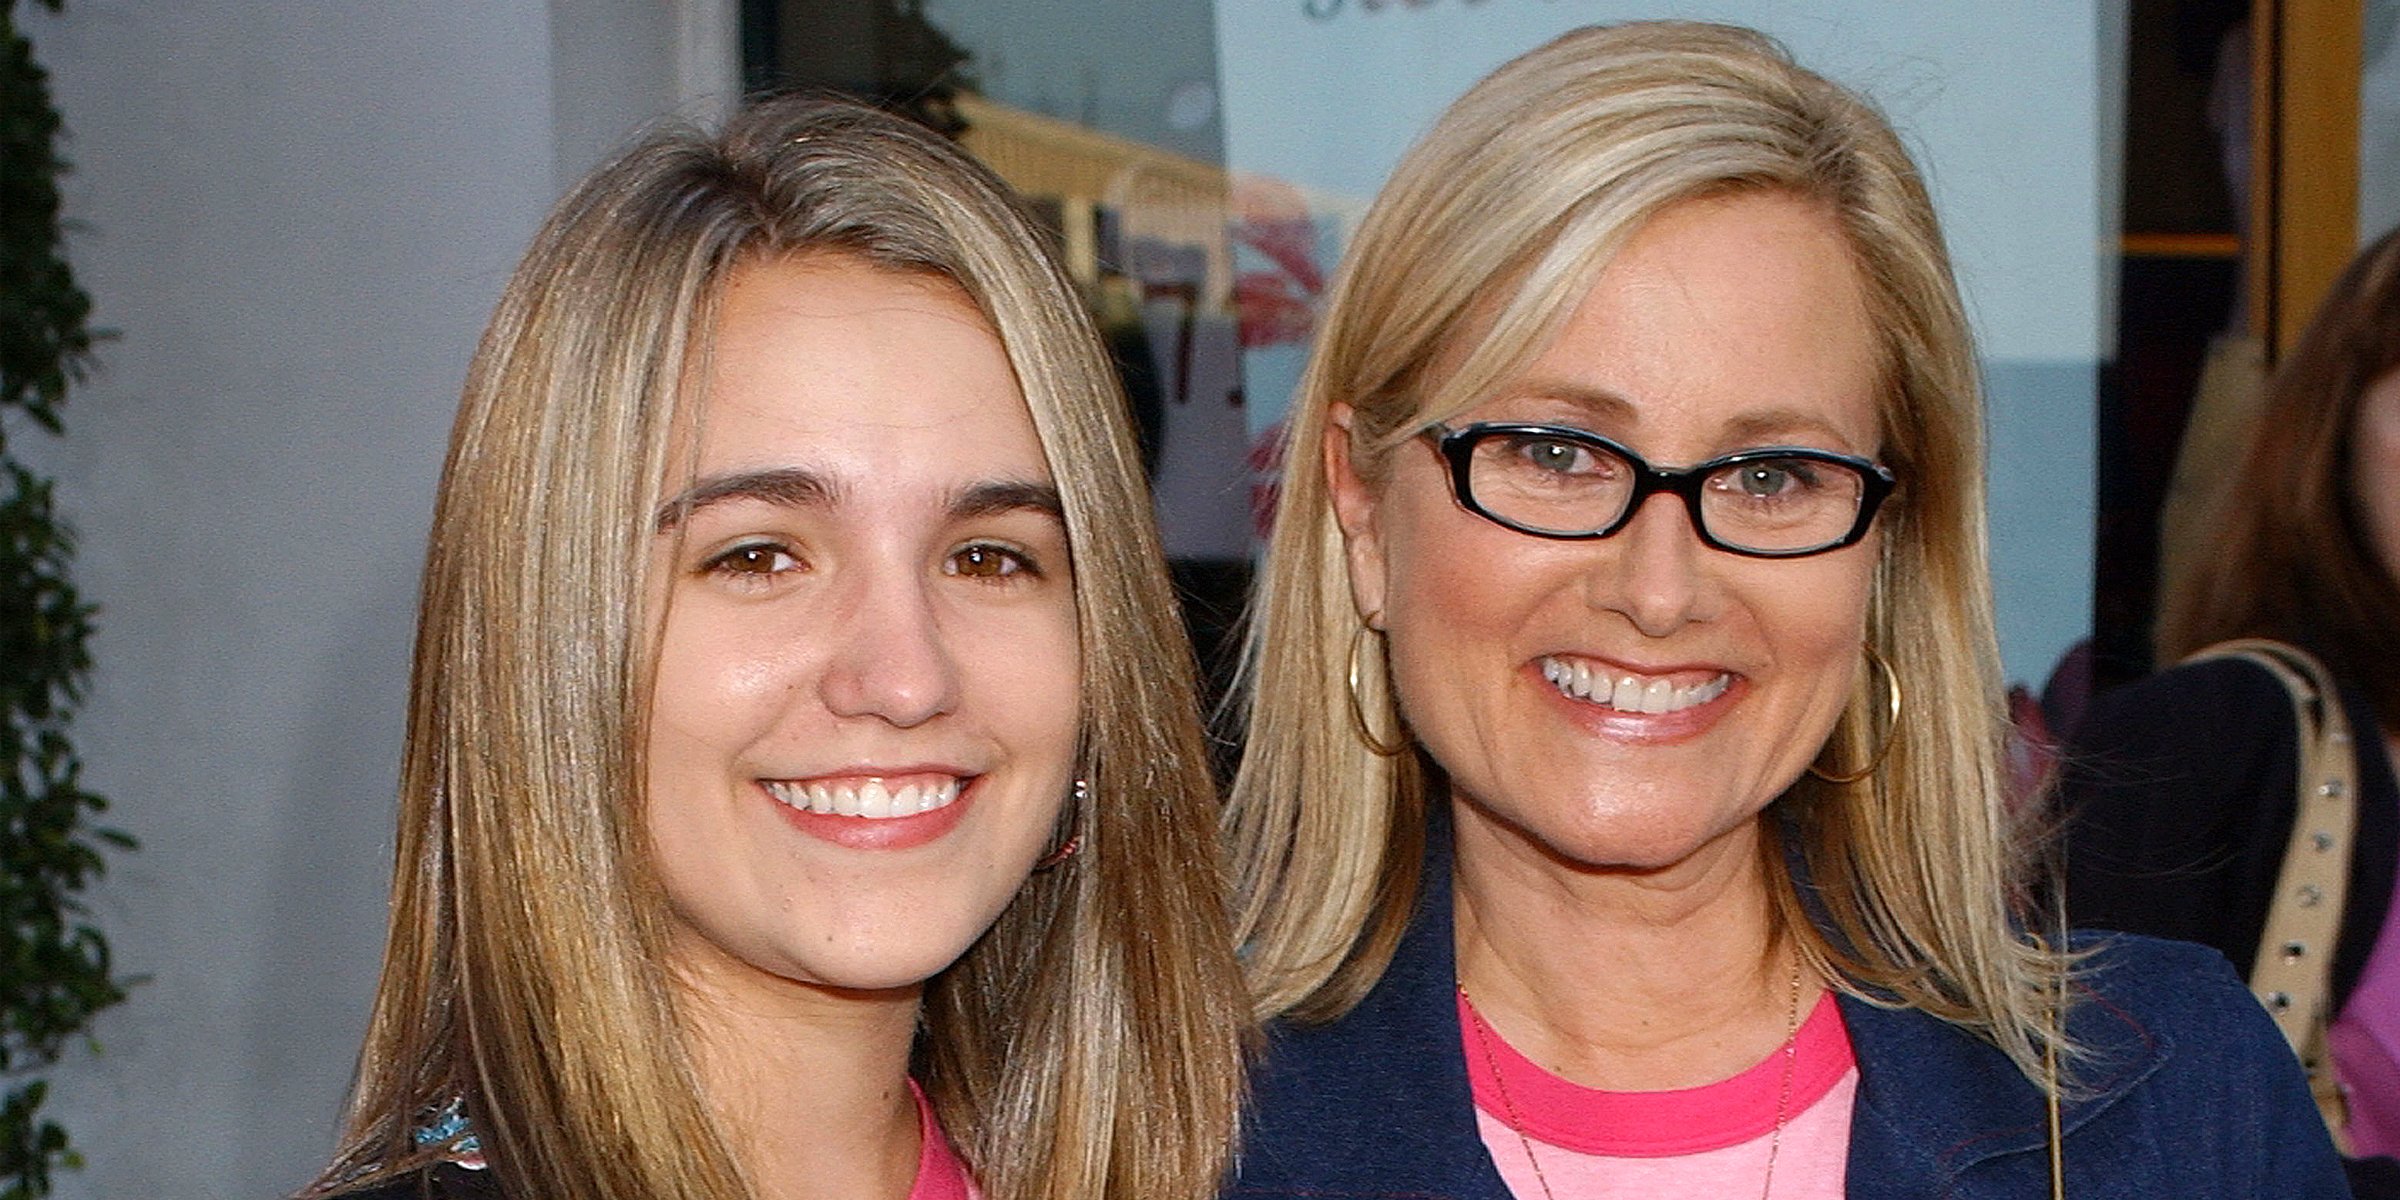 Maureen McCormick and Natalie McCormick | Source: Getty Images